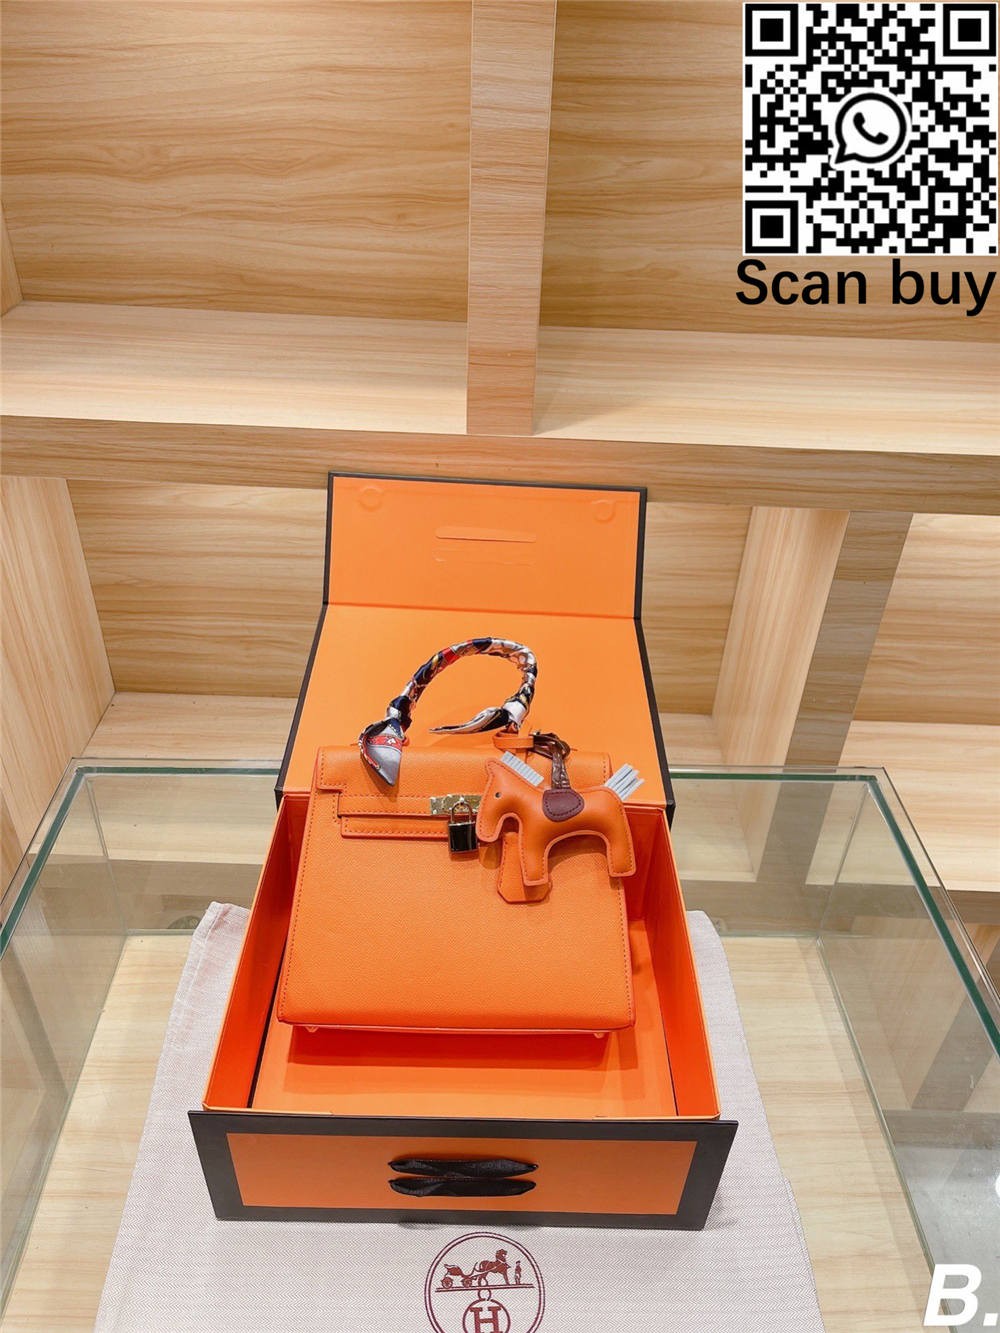 How can I buy a hermes bag charm replica from China? (2022 solutions)-Best Quality Fake Louis Vuitton Bag Online Store, Replica designer bag ru